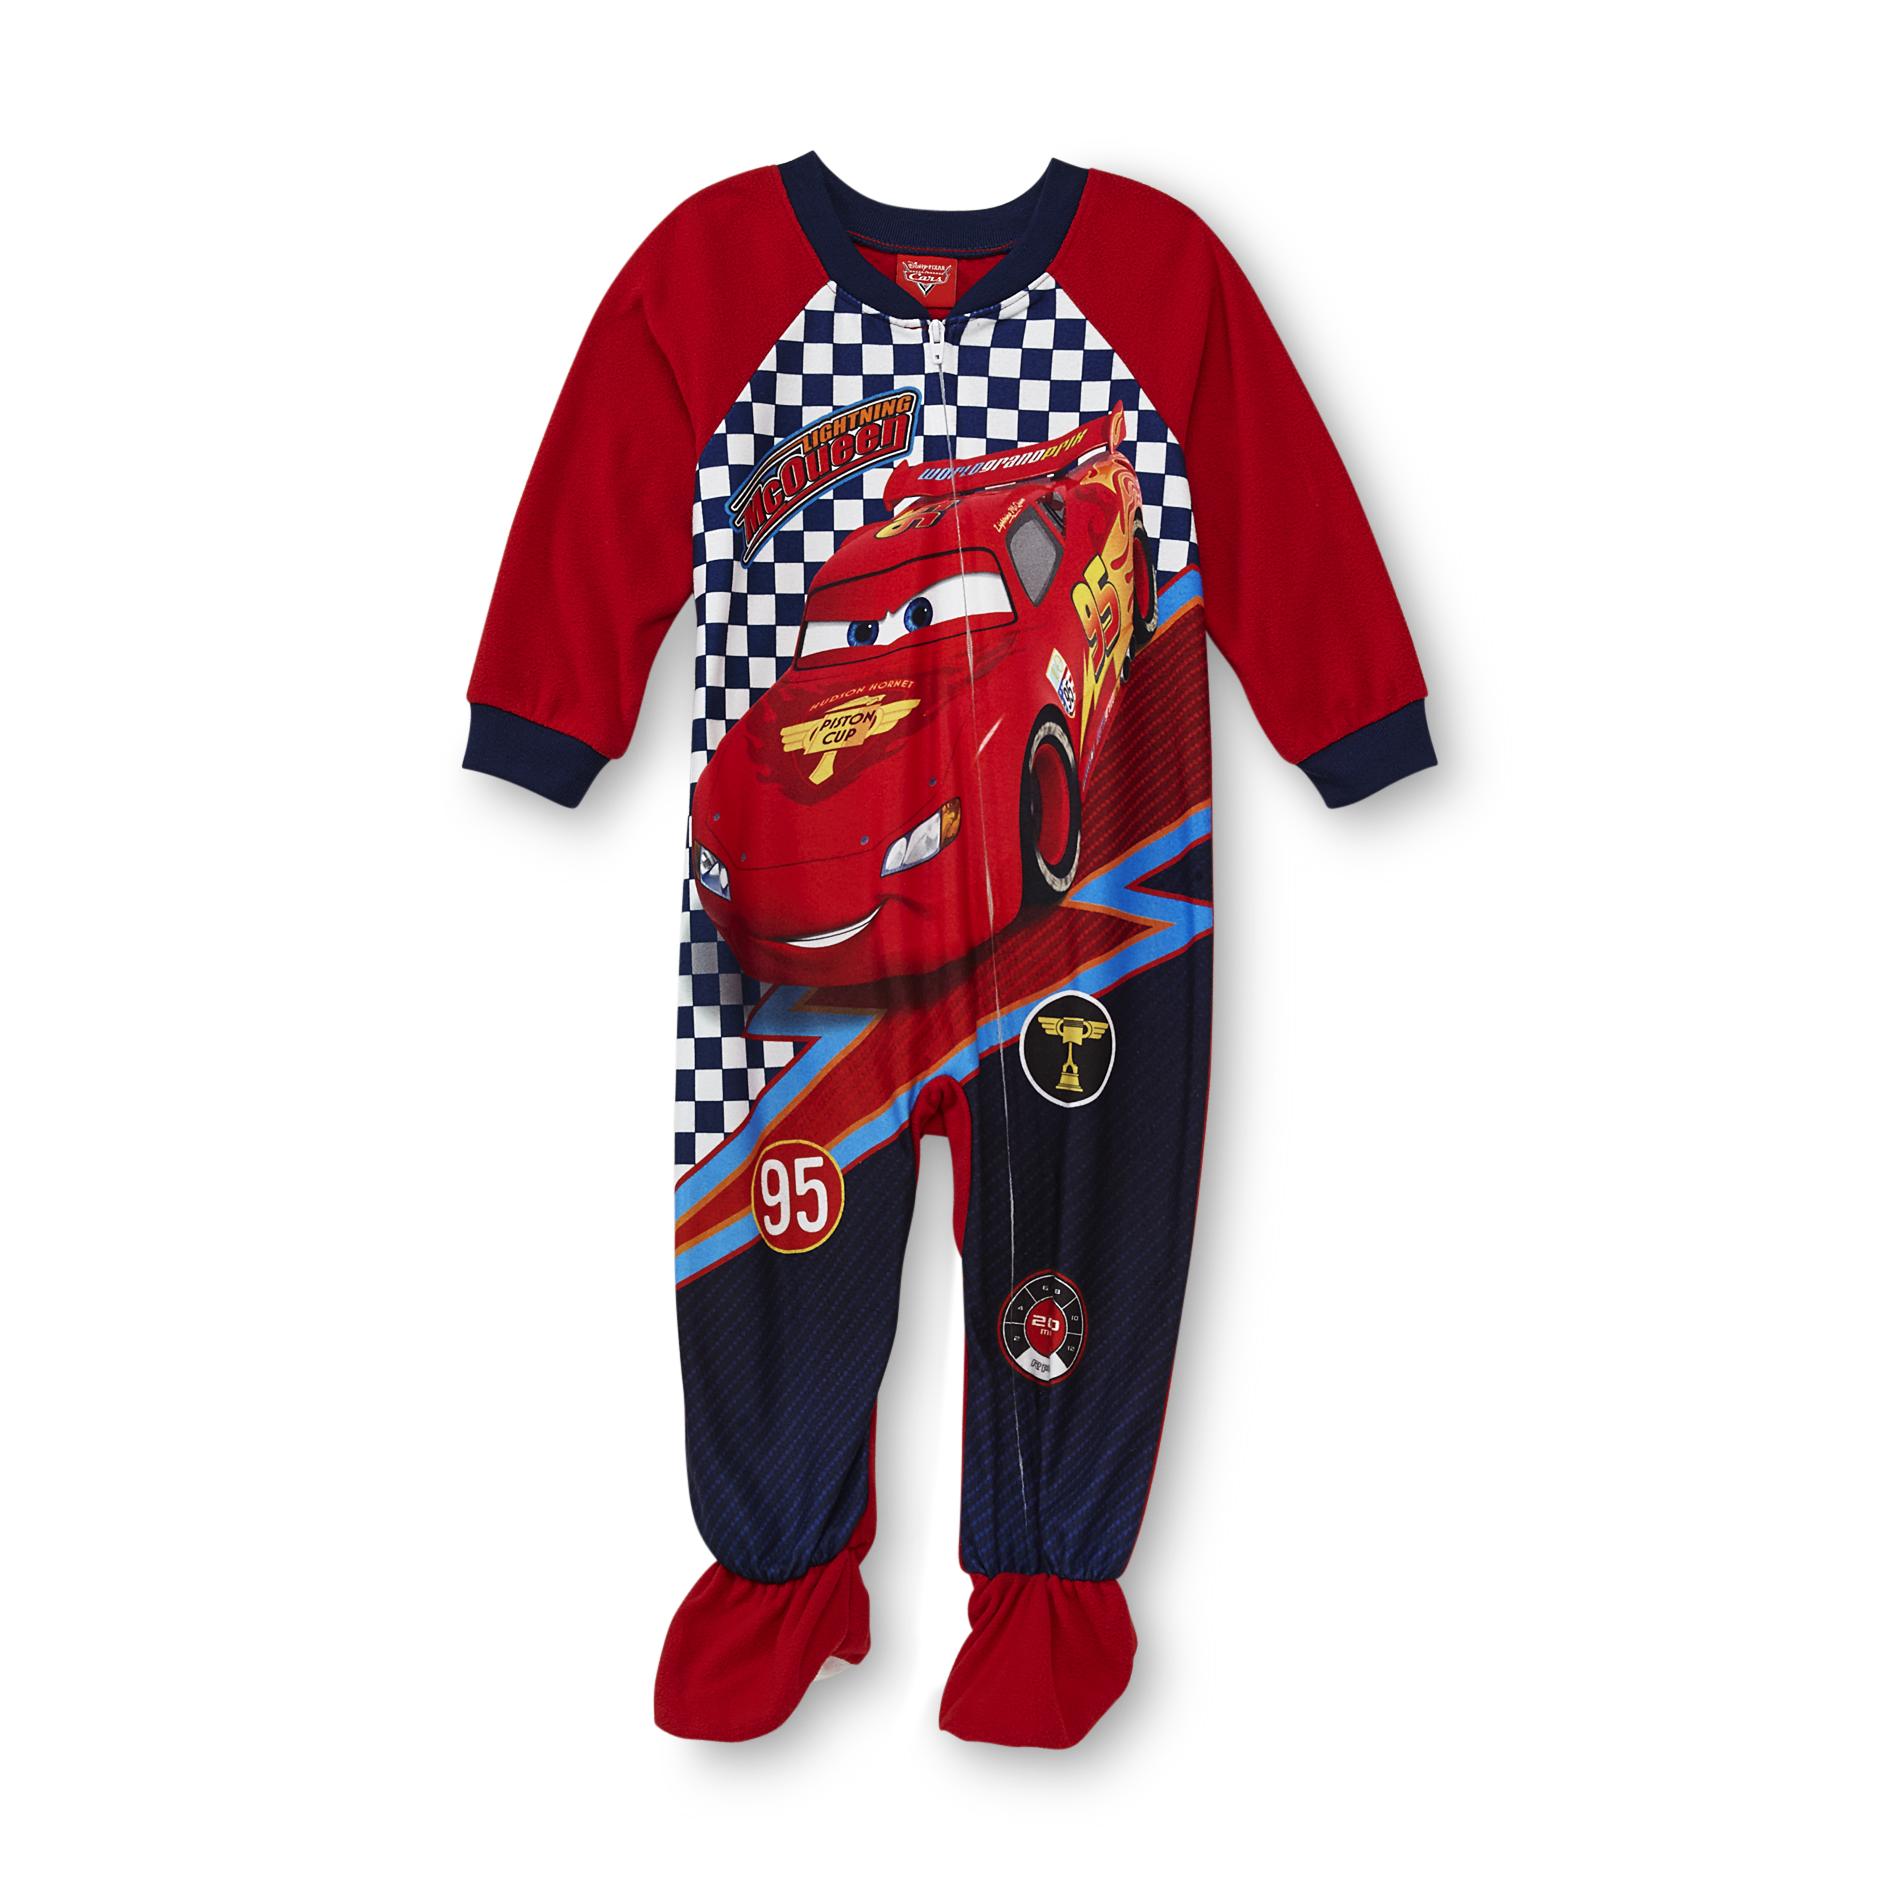 Disney Cars Infant & Toddler Boy's Footed Pajamas